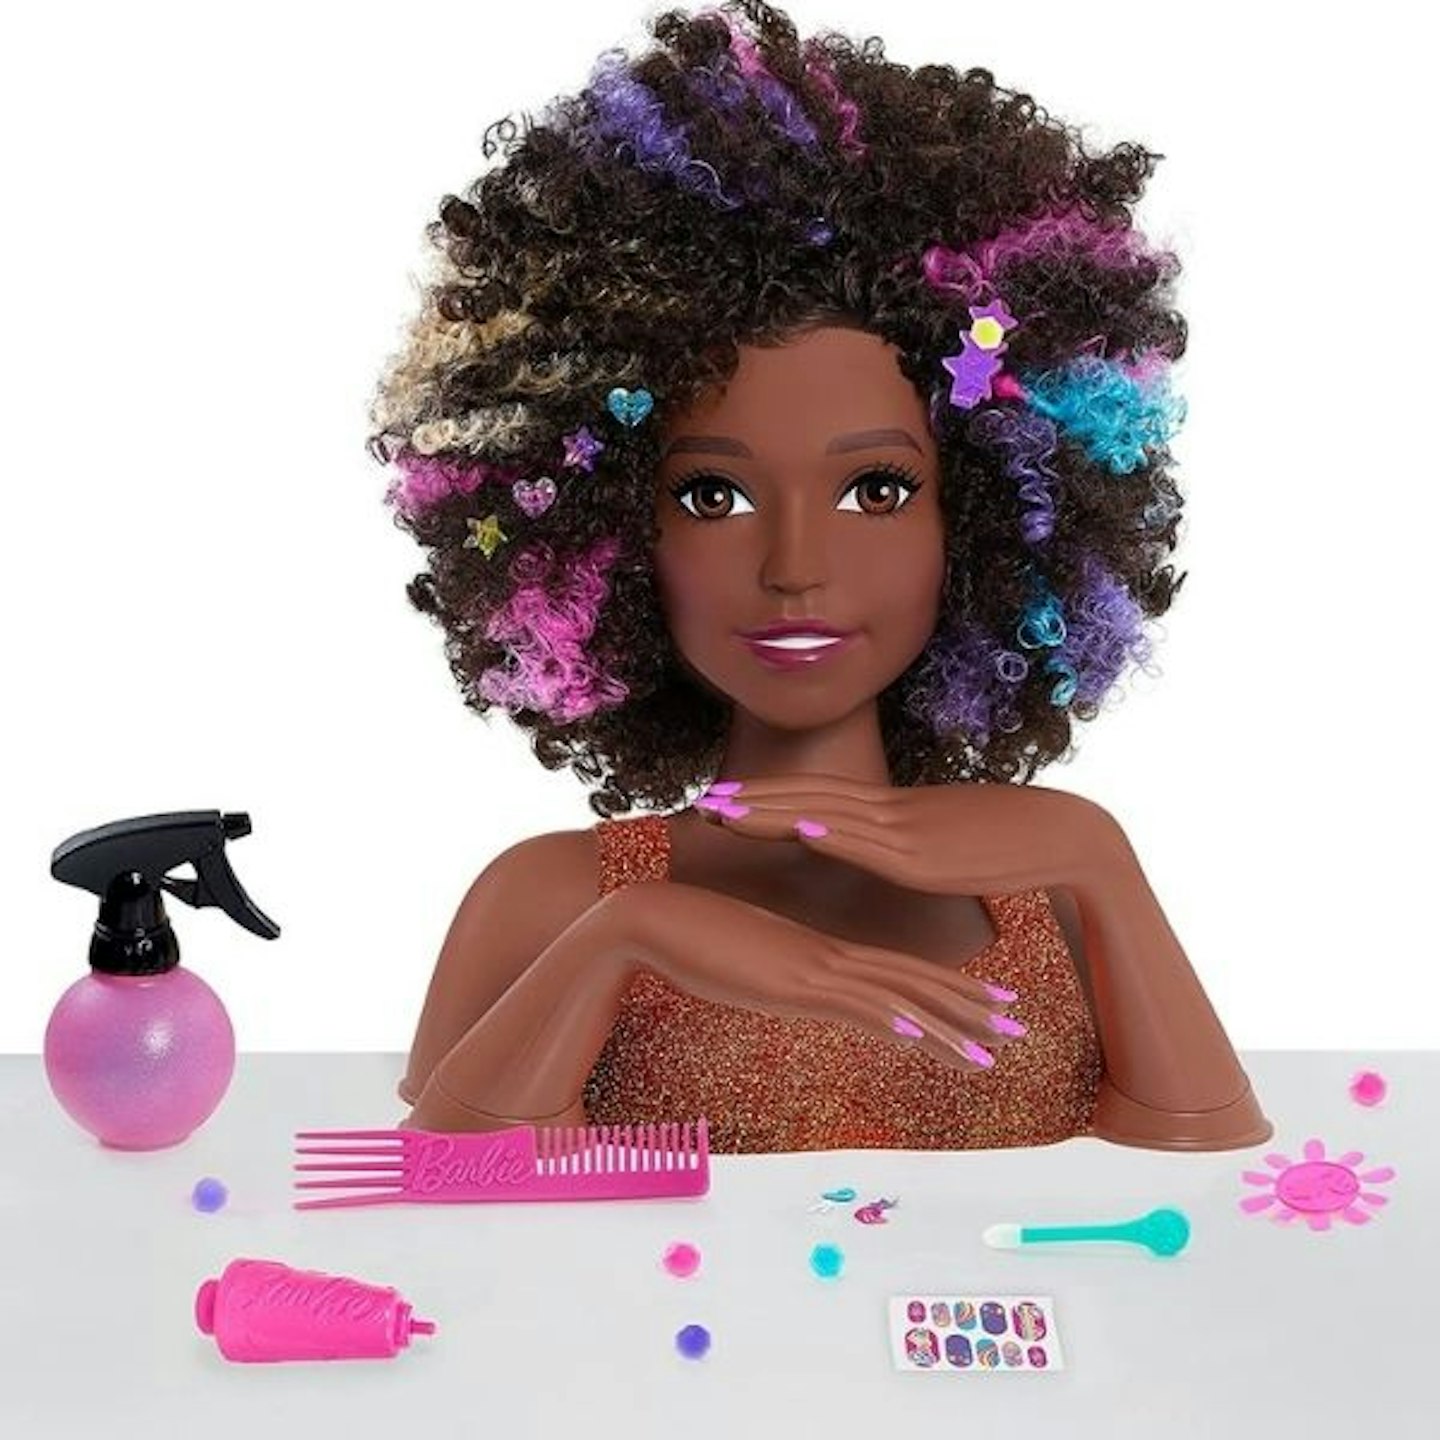 Barbie afro styling head